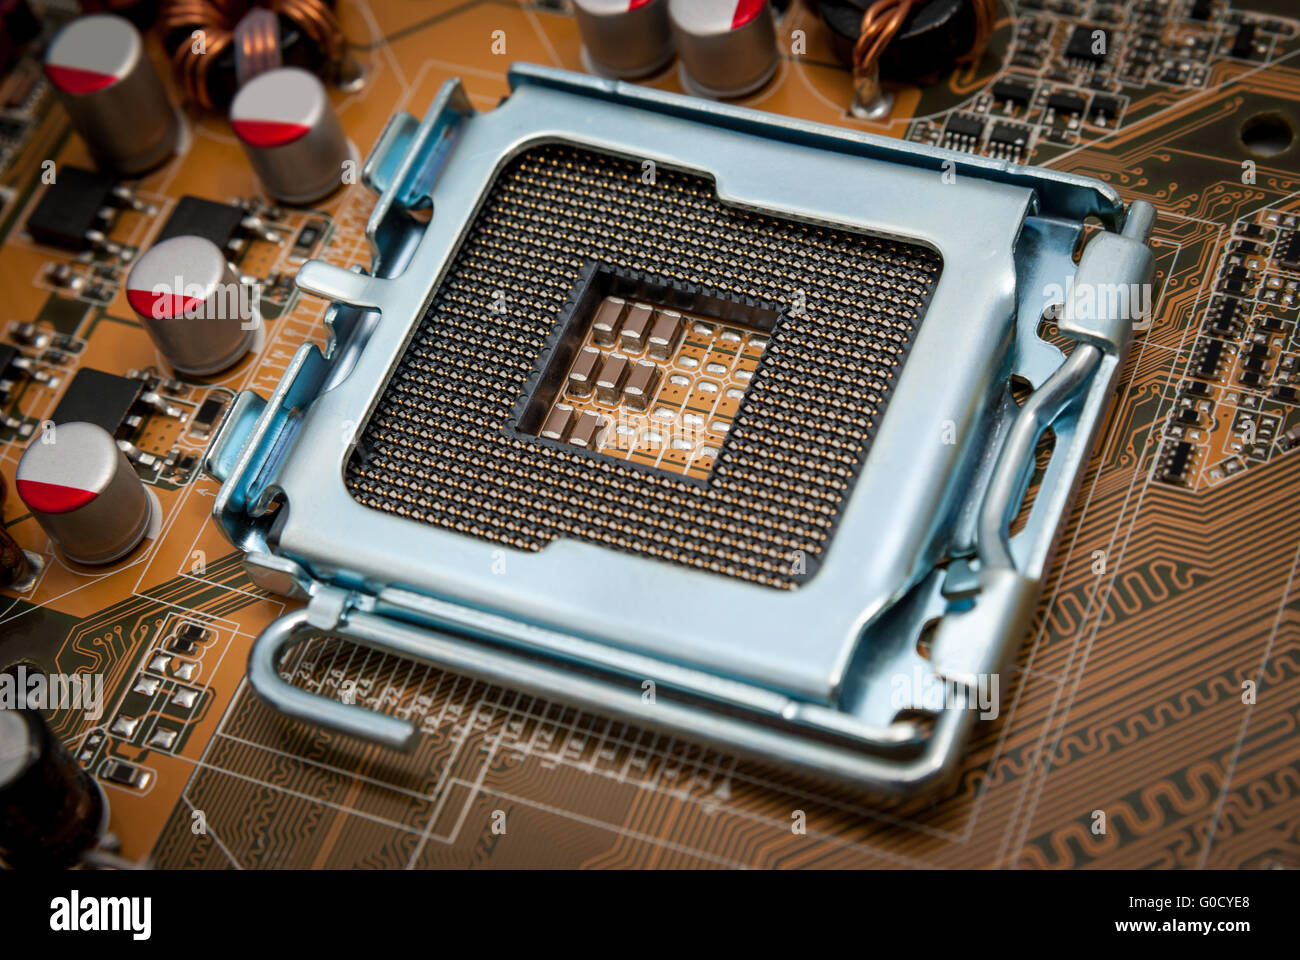 Empty CPU processor socket with pins on motherboar Stock Photo